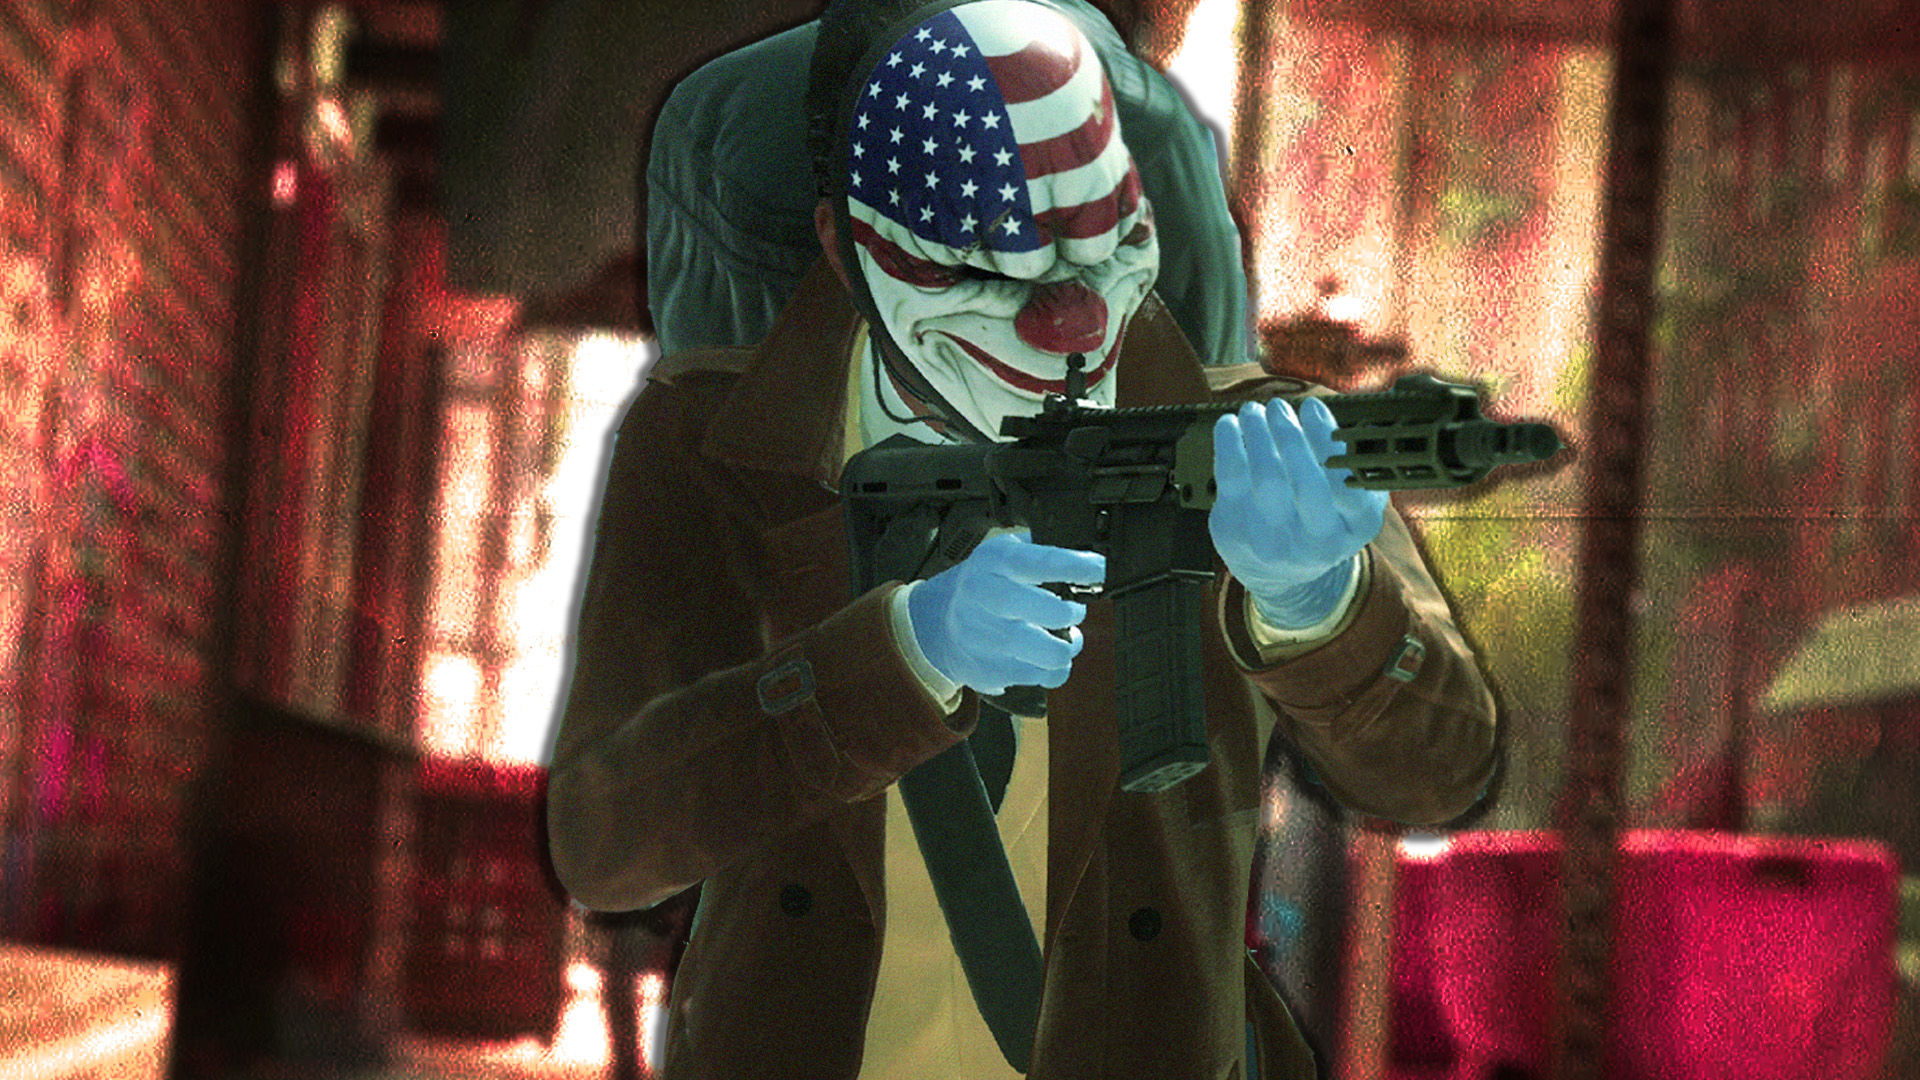 Payday 3: How To Perform Takedown